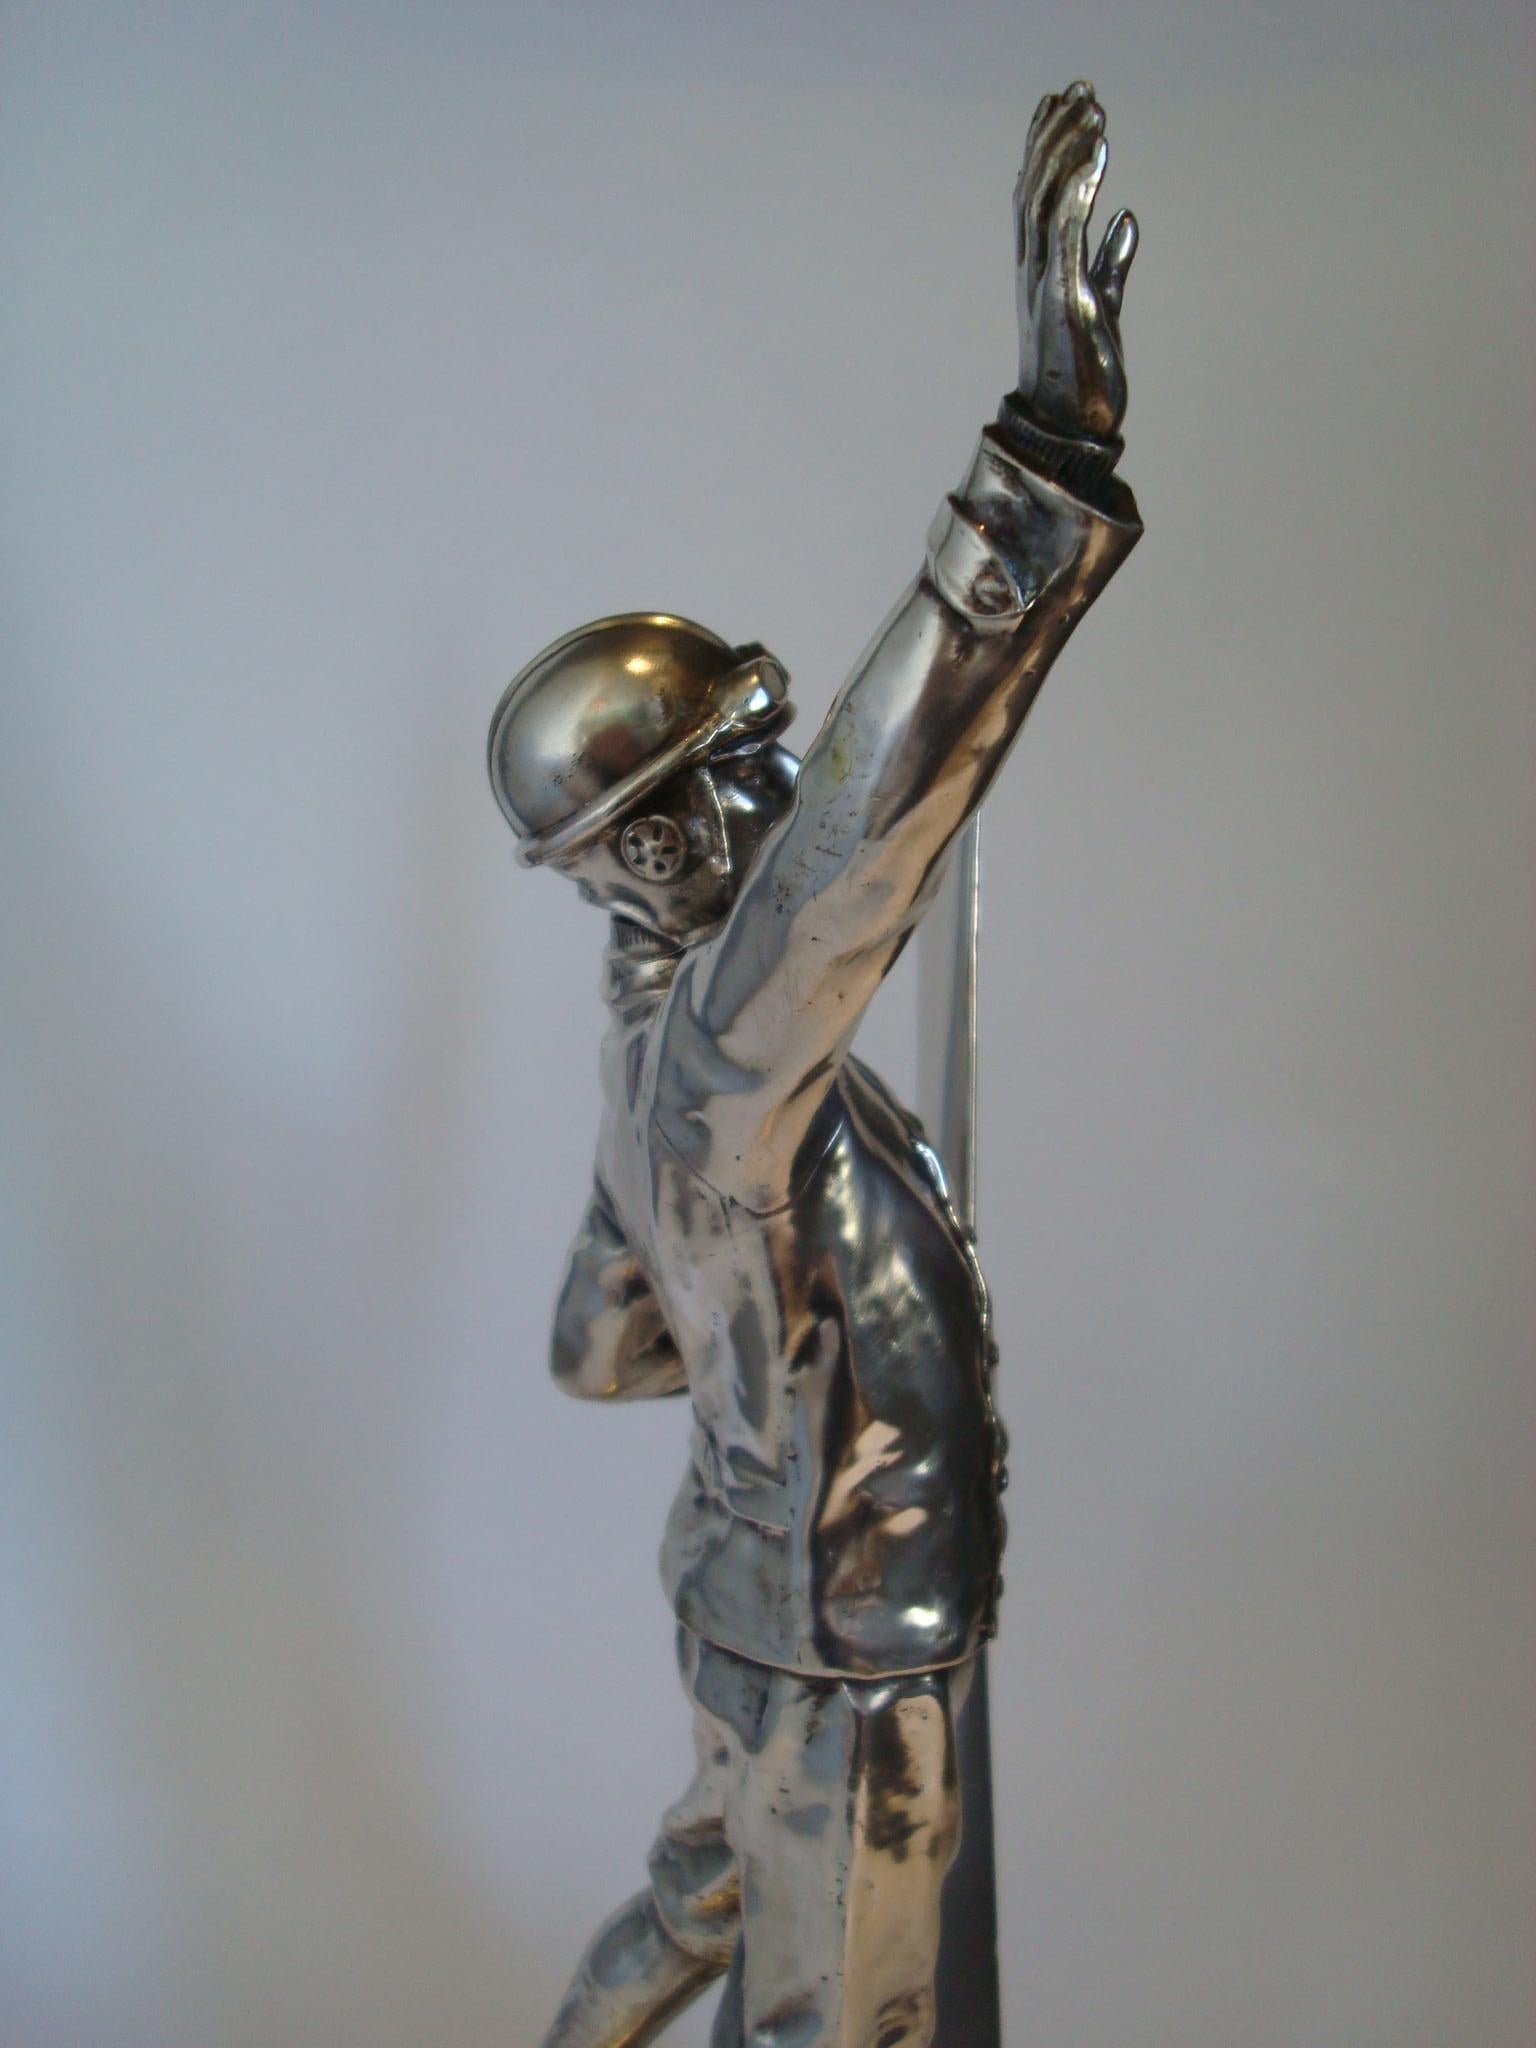 French Early Aviation Pilot Silvered Sculpture, France, 1910s